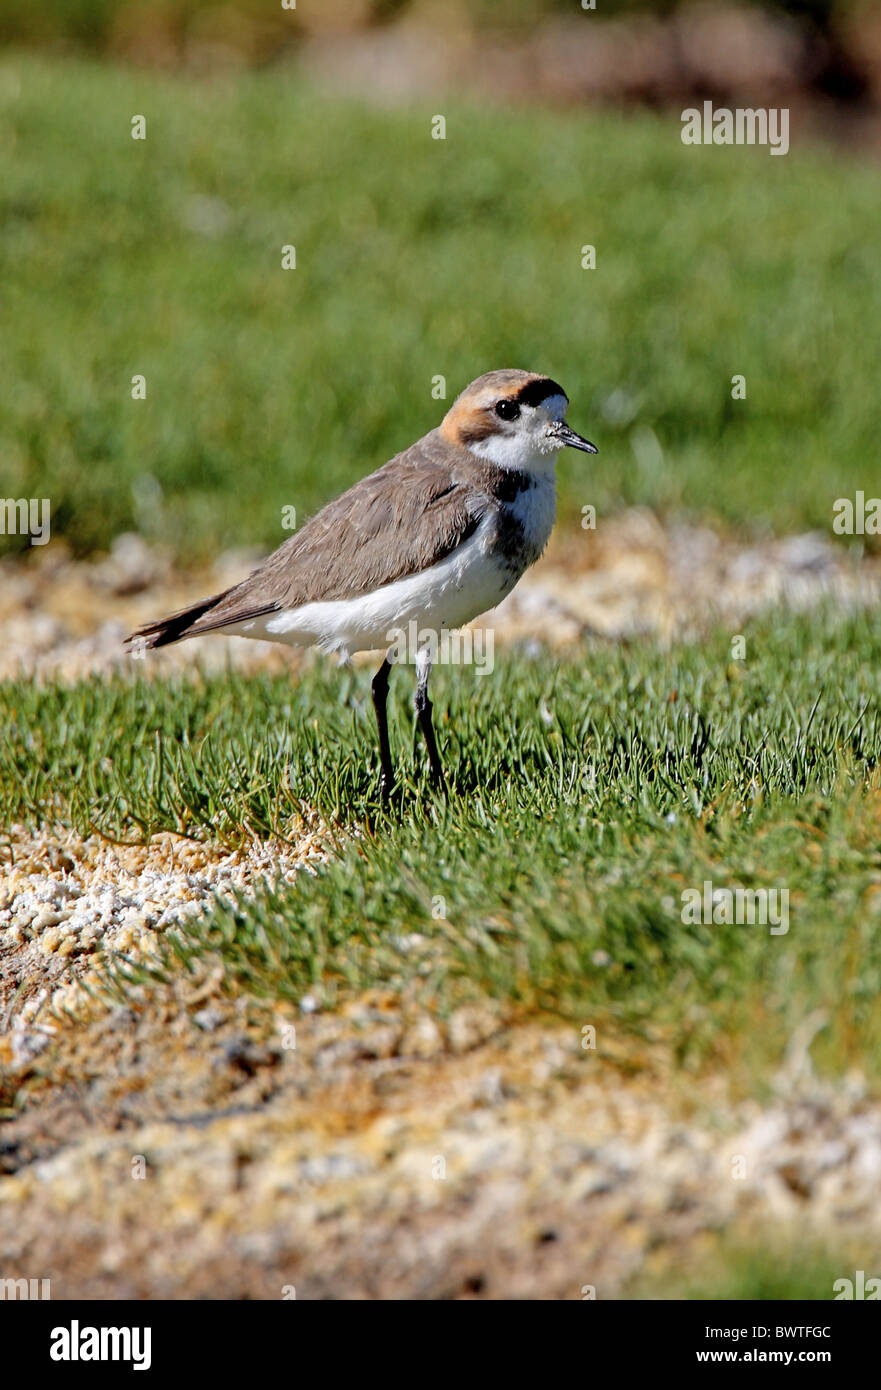 Puna Plover (Charadrius alticola) adult, standing on grassy mound in saltflats, Jujuy, Argentina, january Stock Photo